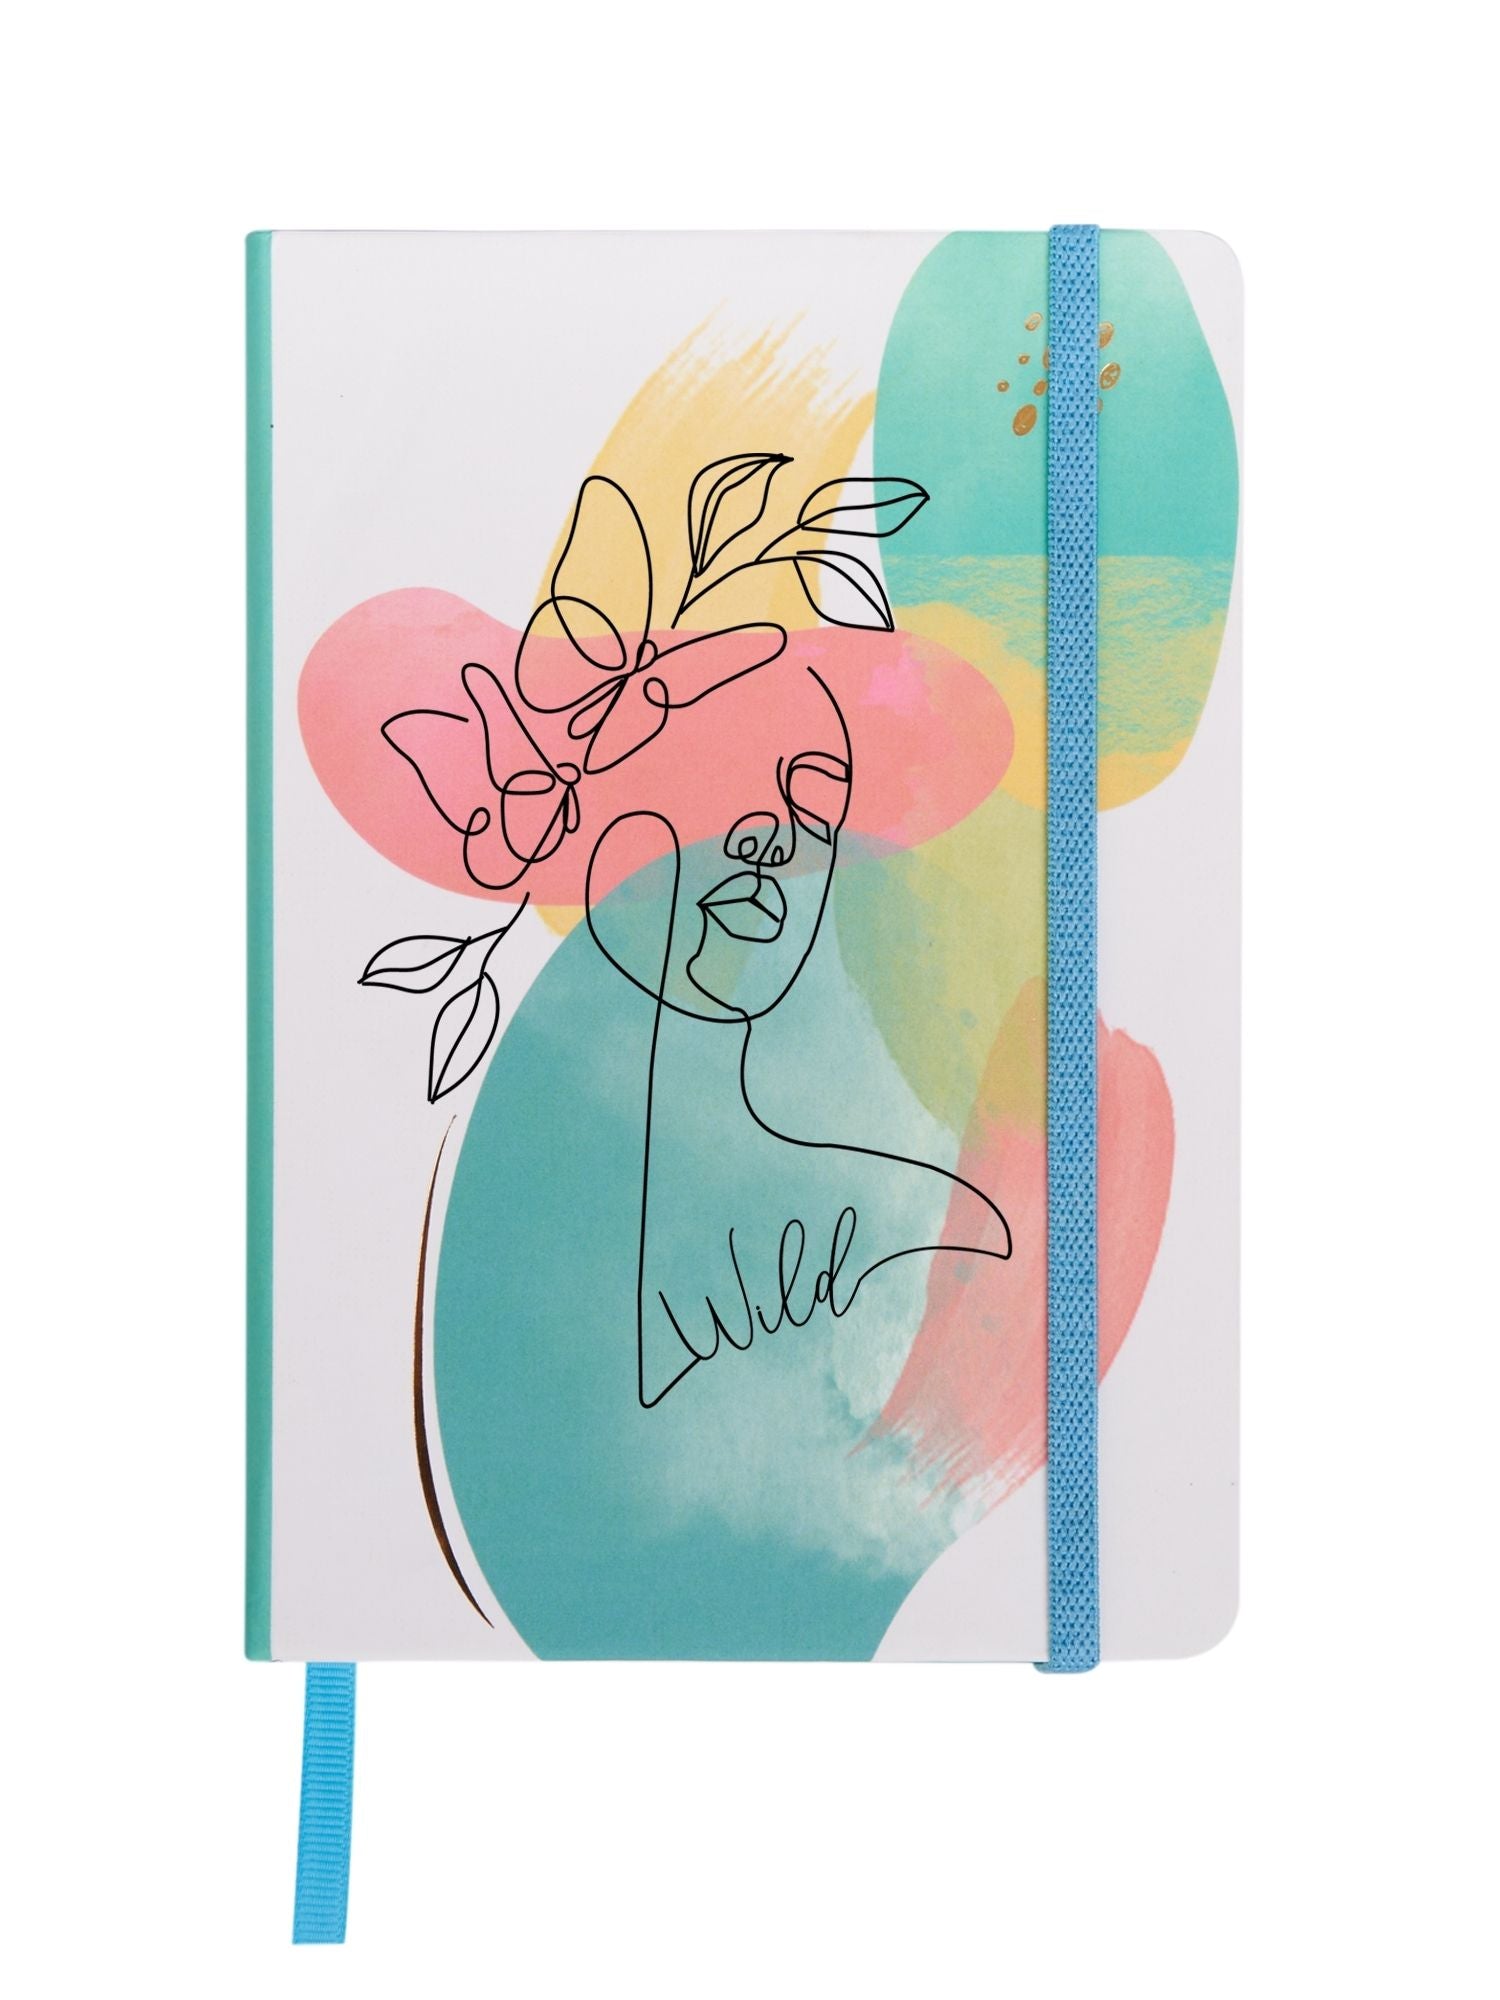 DOODLE Expressions Hardbound B6 Diary Notebook - WILD